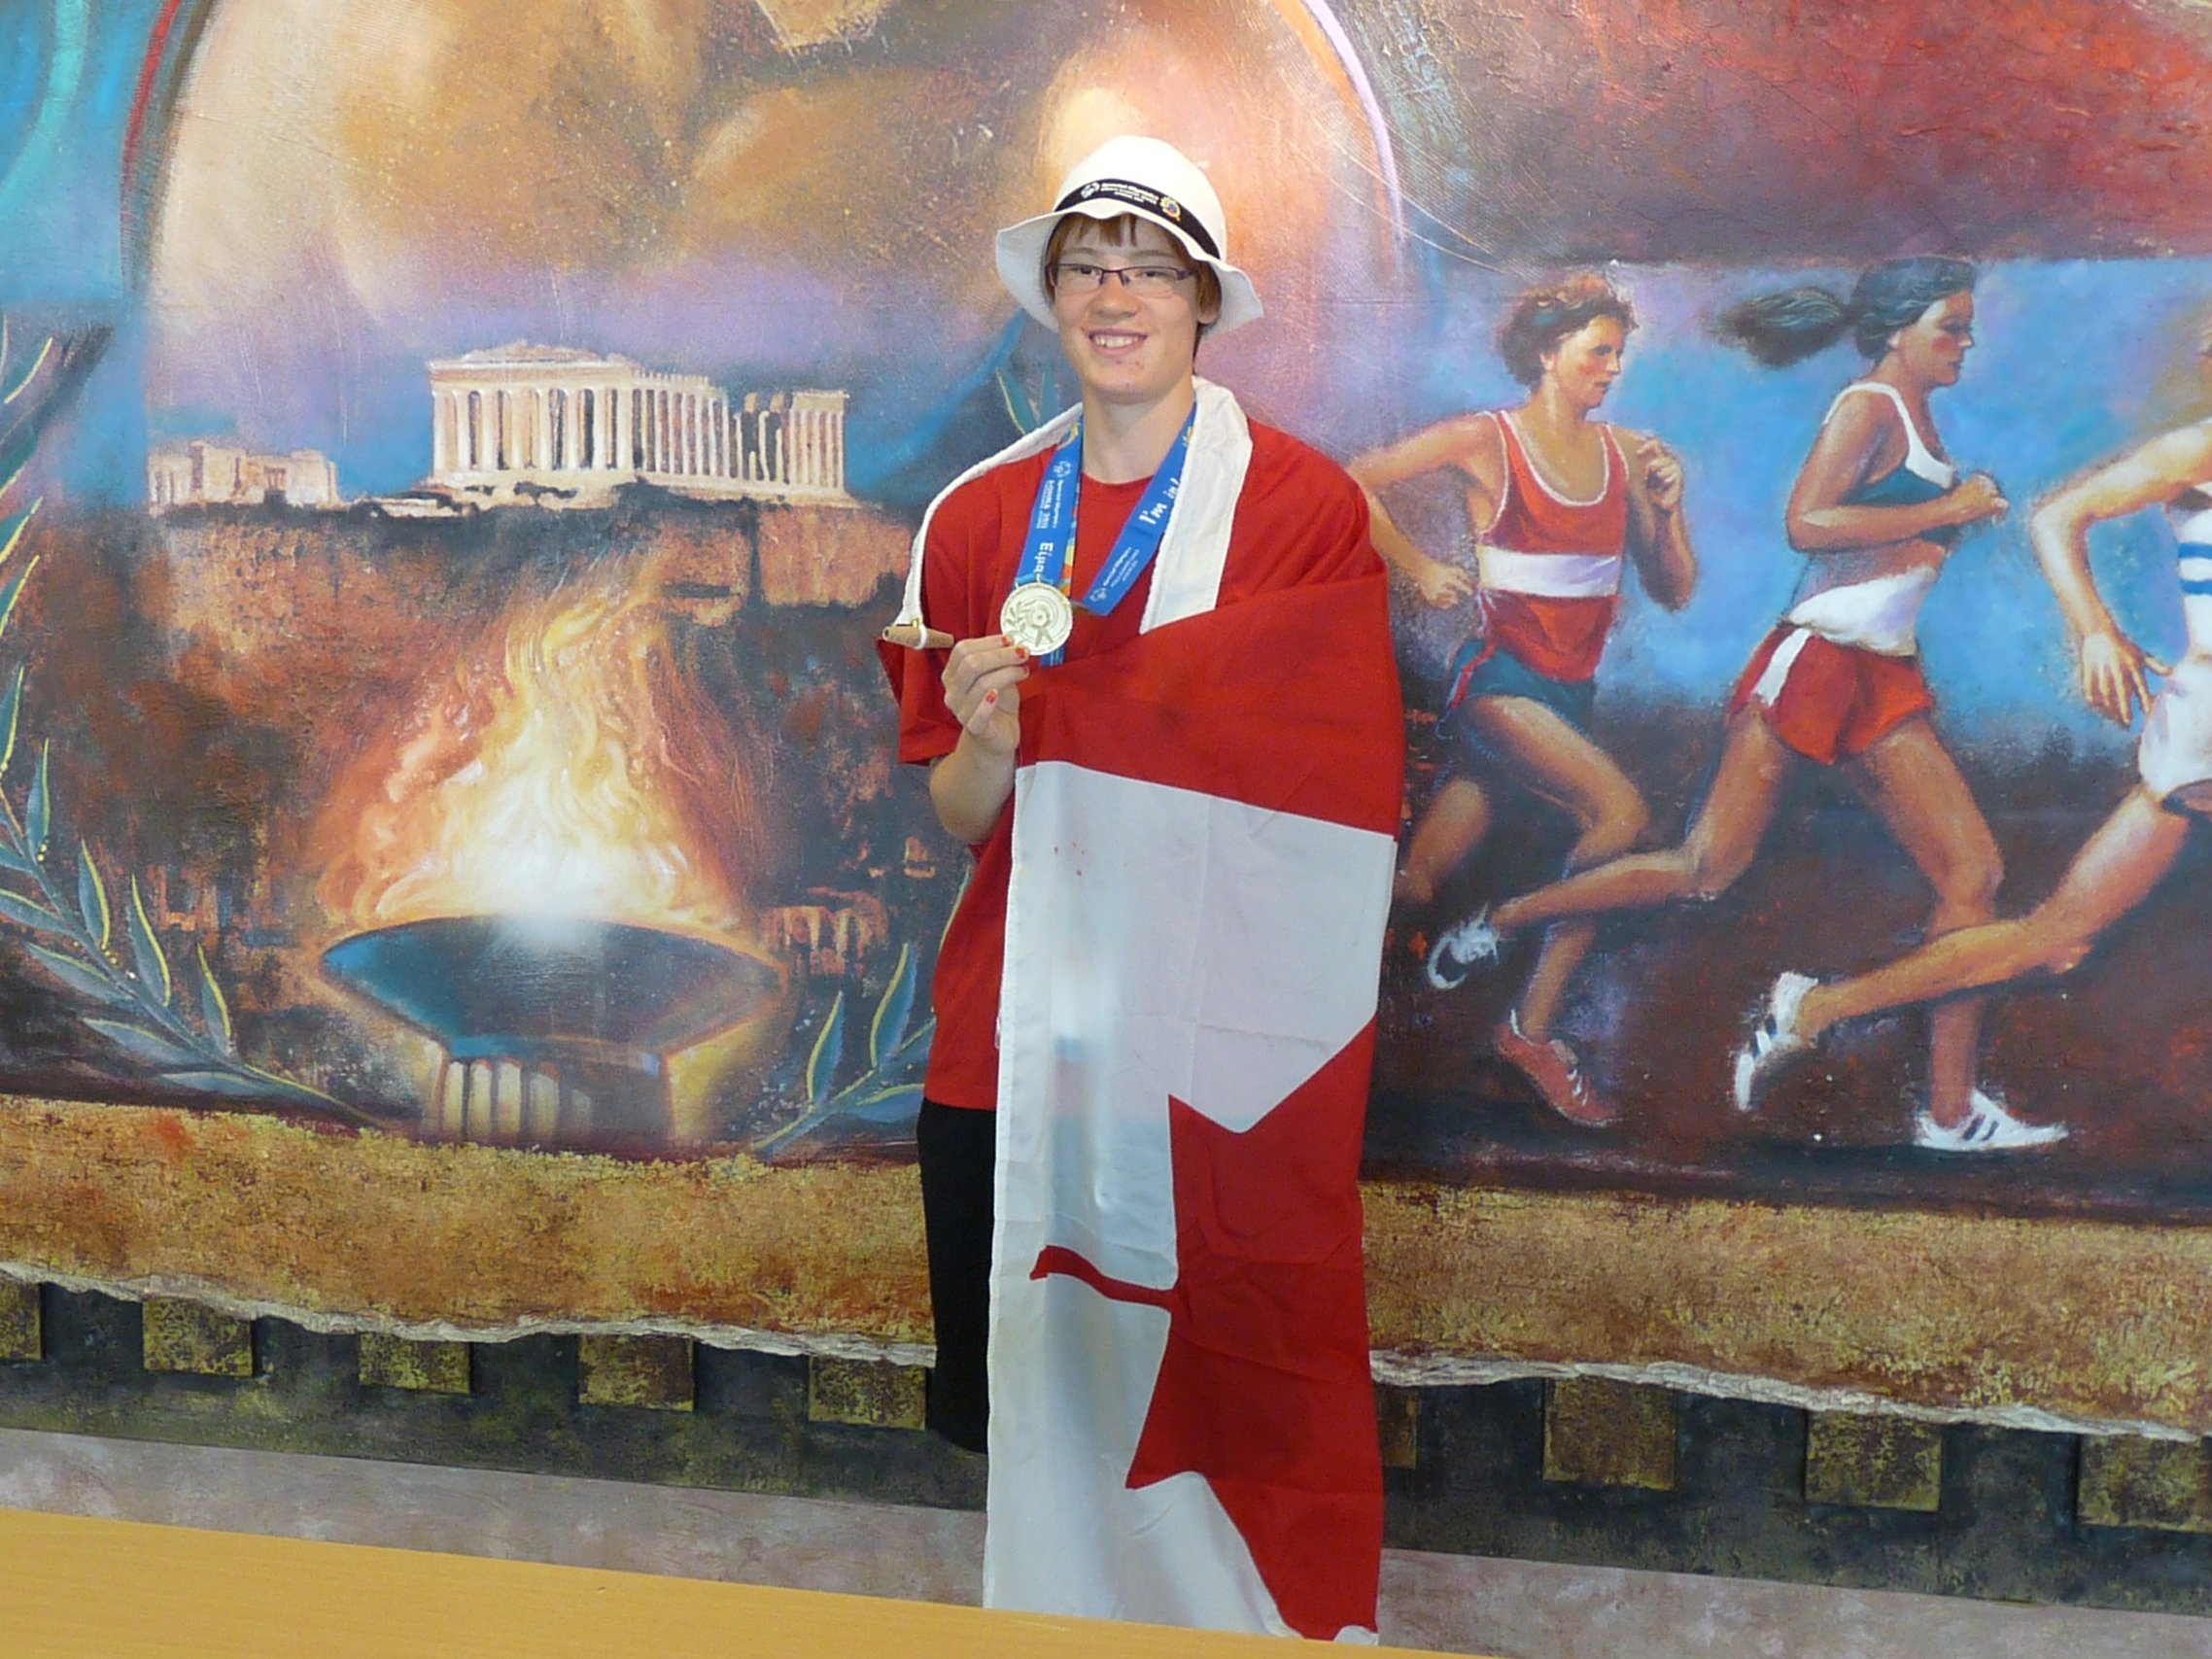 MILESTONE- Clive resident Thomasina Payne recently returned from the World Summer Games in Athens